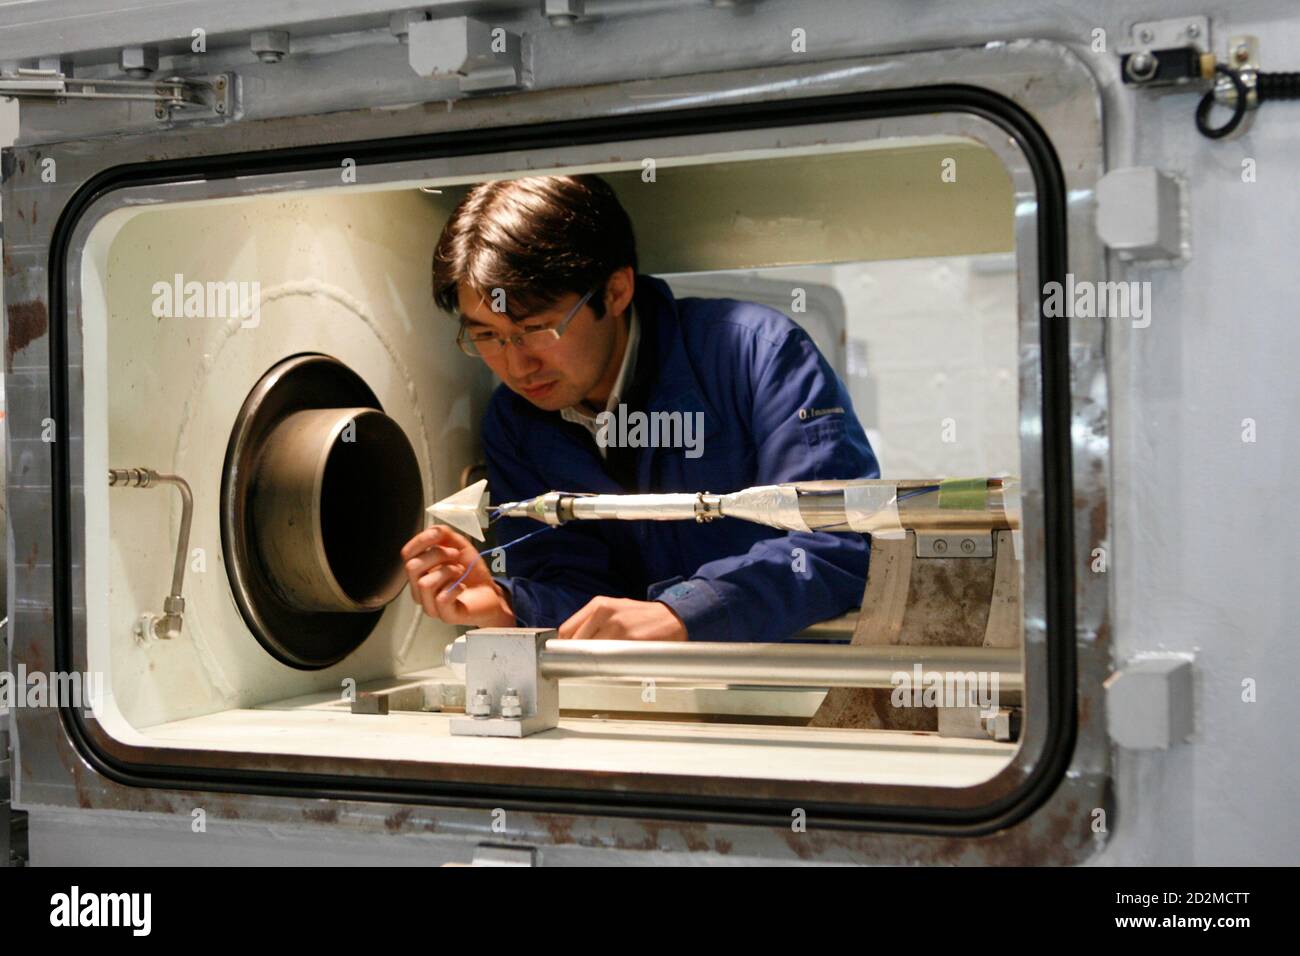 University of Tokyo research associate in aerospace engineering Osamu  Imamura handles an origami airplane test model before a test in a wind  tunnel at a Tokyo University research facility in Kashiwa, Japan